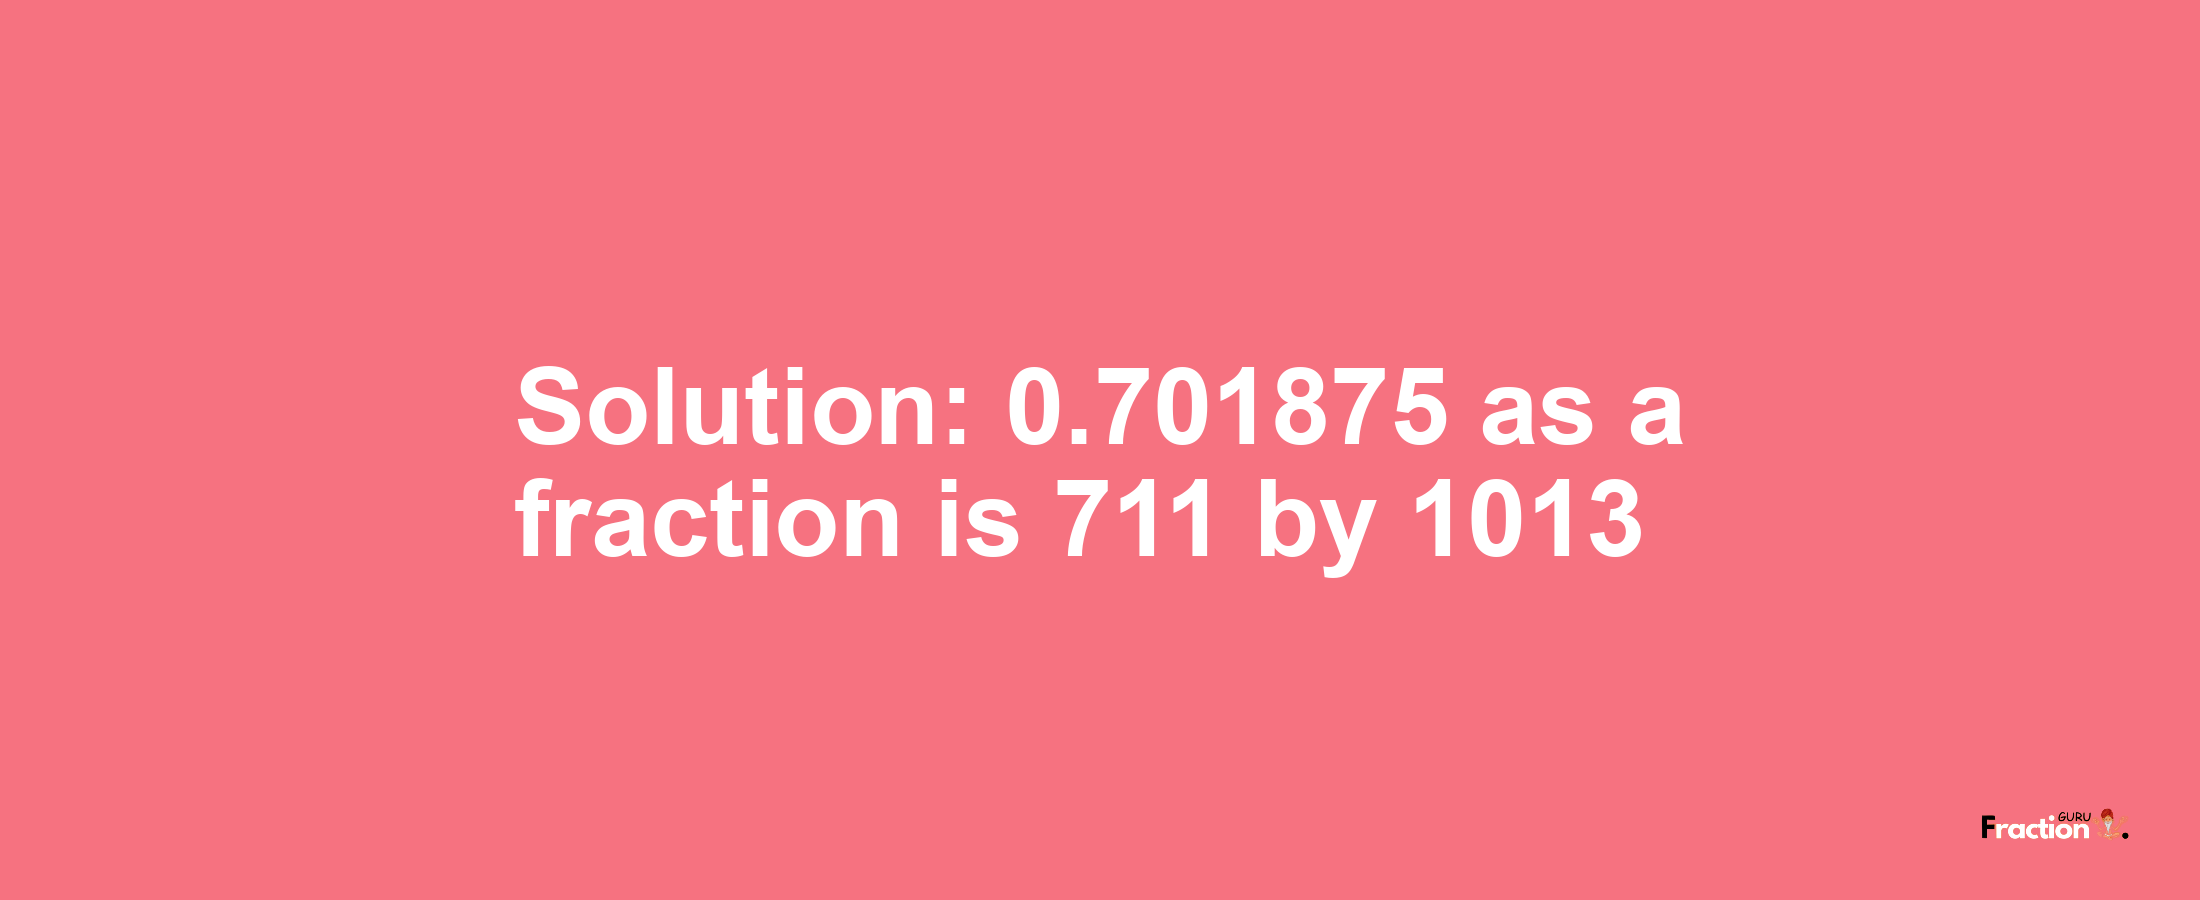 Solution:0.701875 as a fraction is 711/1013